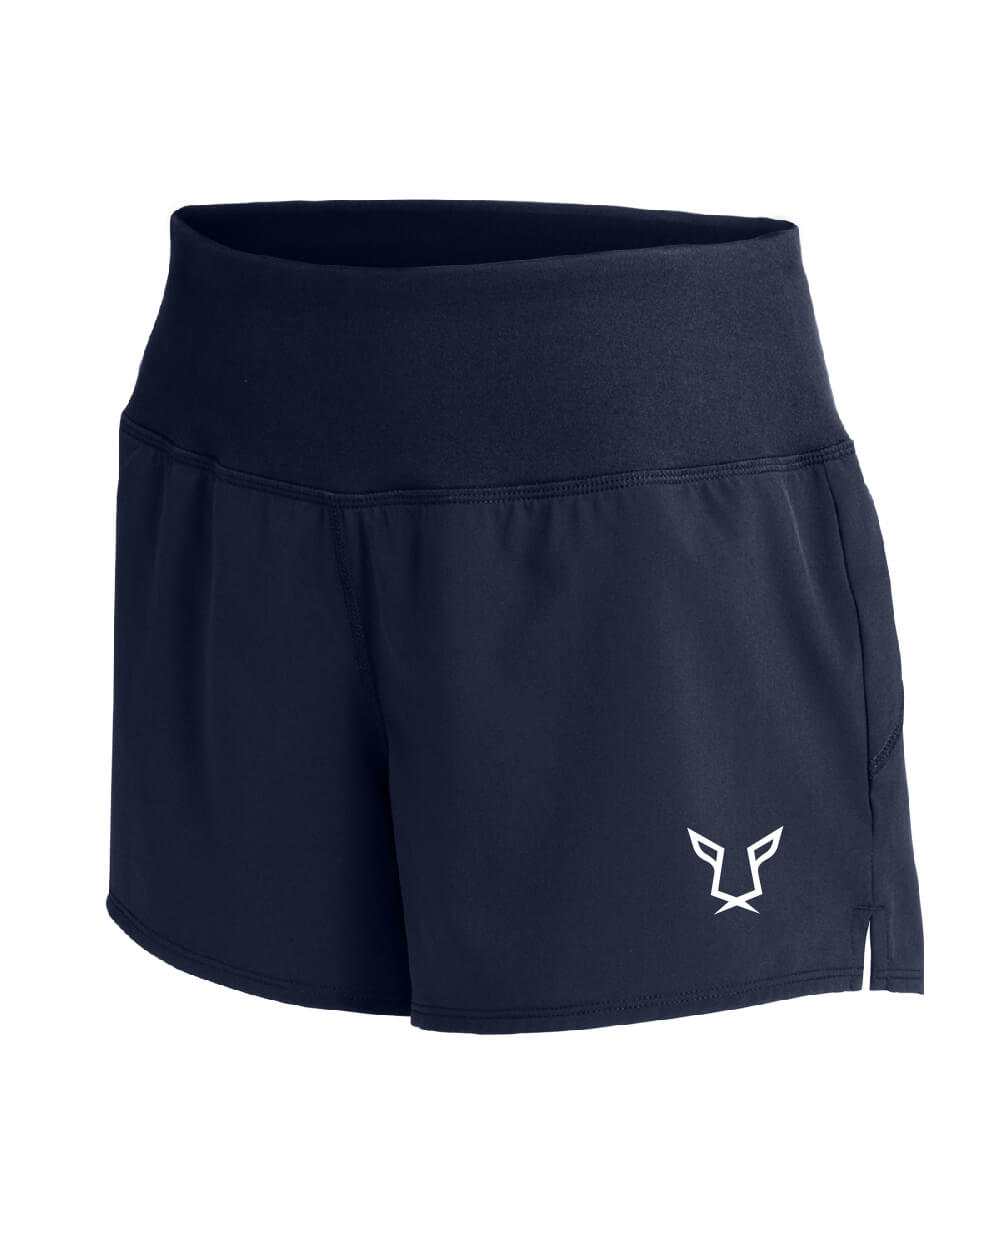 Women's Navy Evolution Performance Shorts (Front) by Odisi Apparel